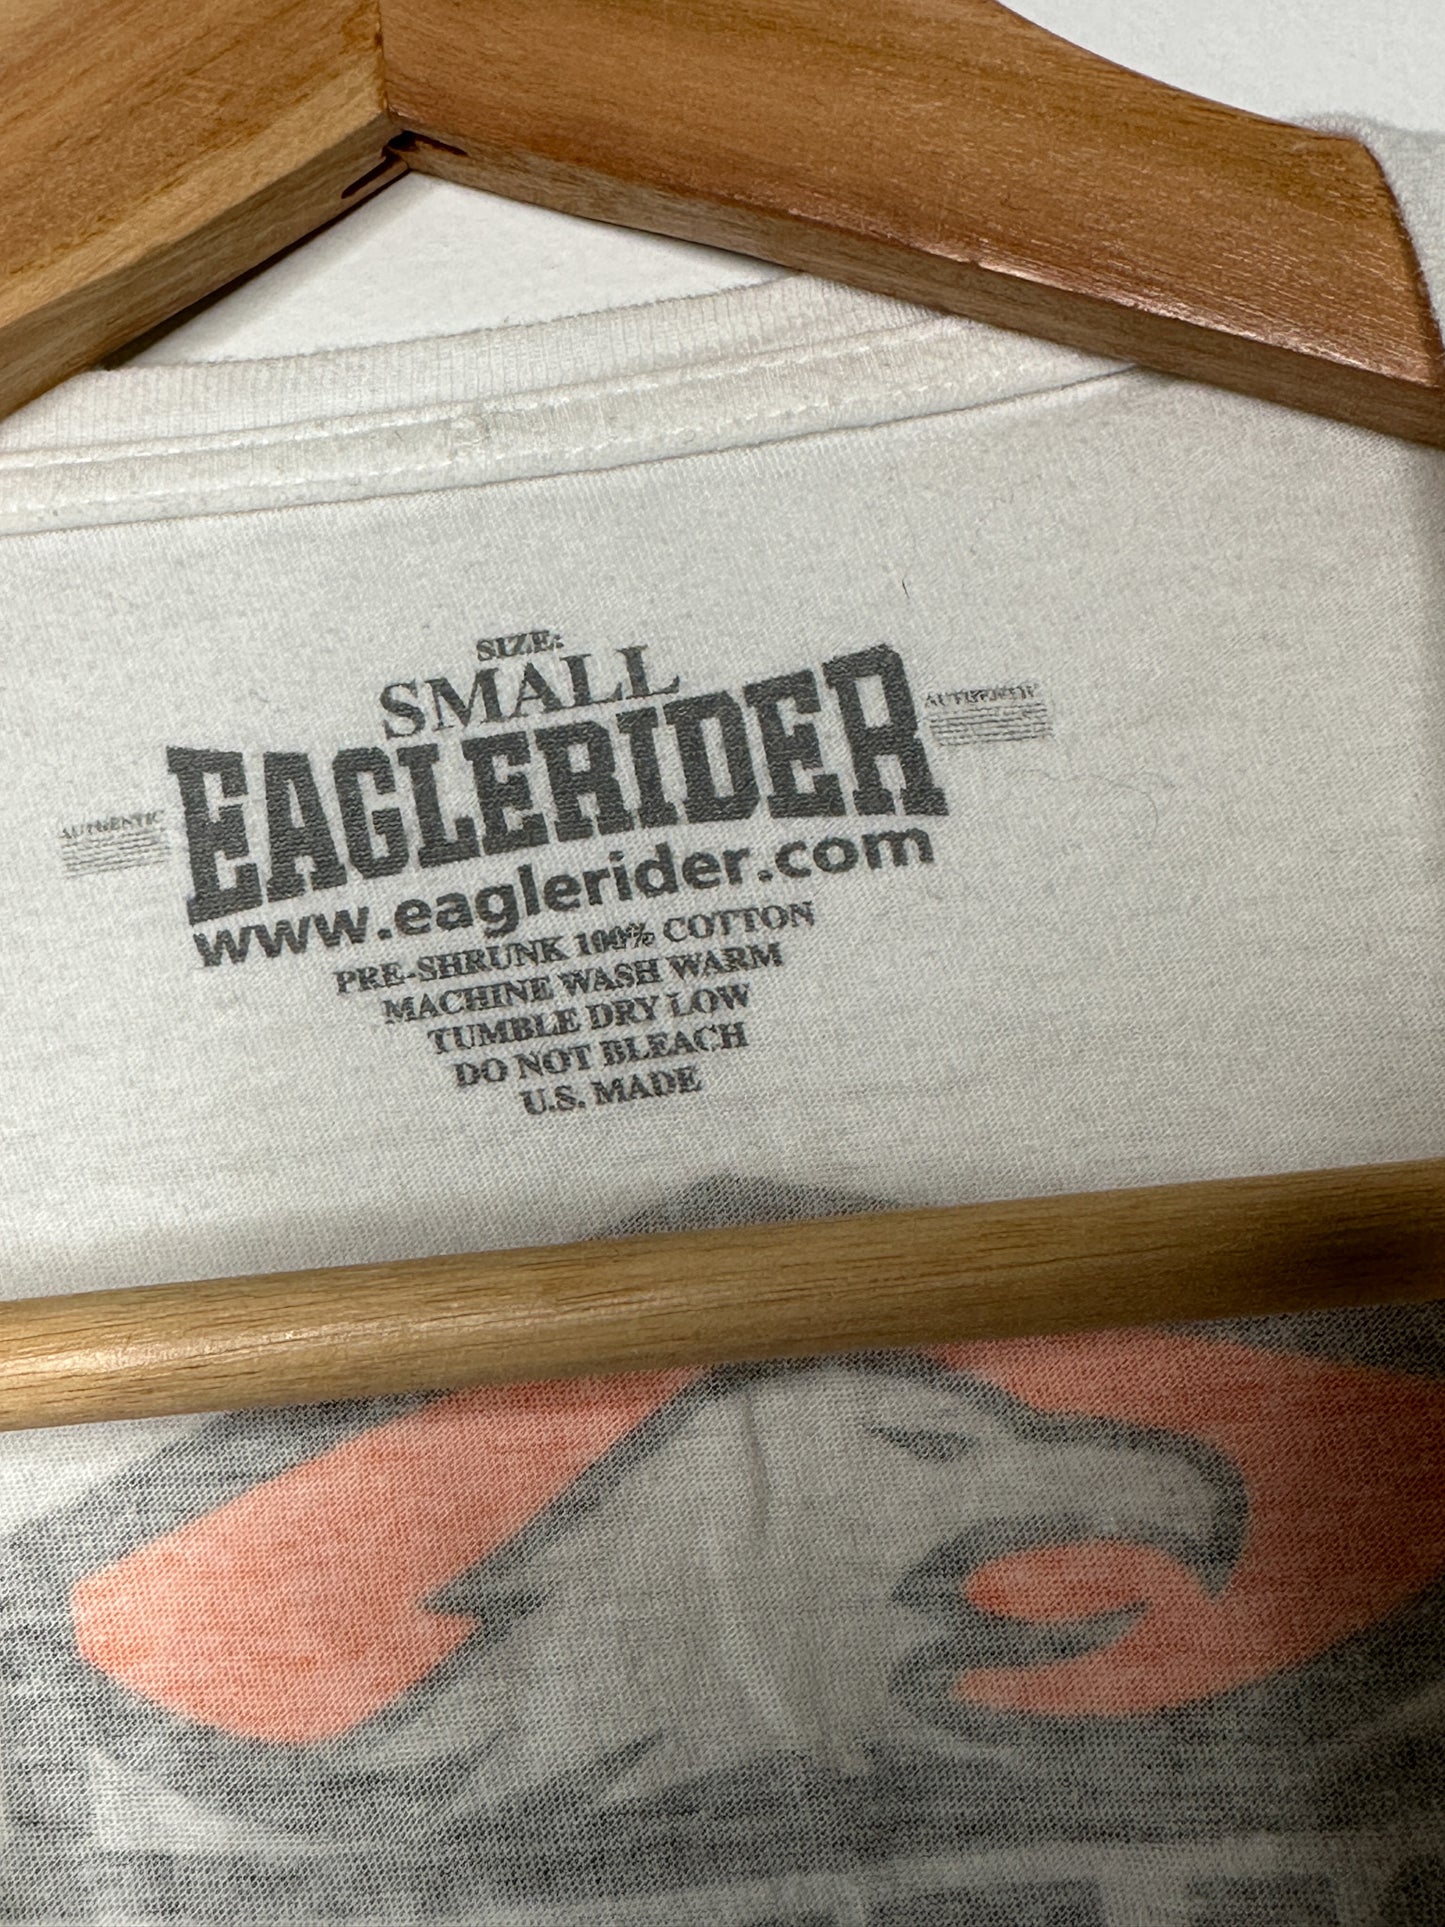 Vintage Eagle Rider T-Shirt Long Sleeves | Motorcycle T-shirts | Size: S